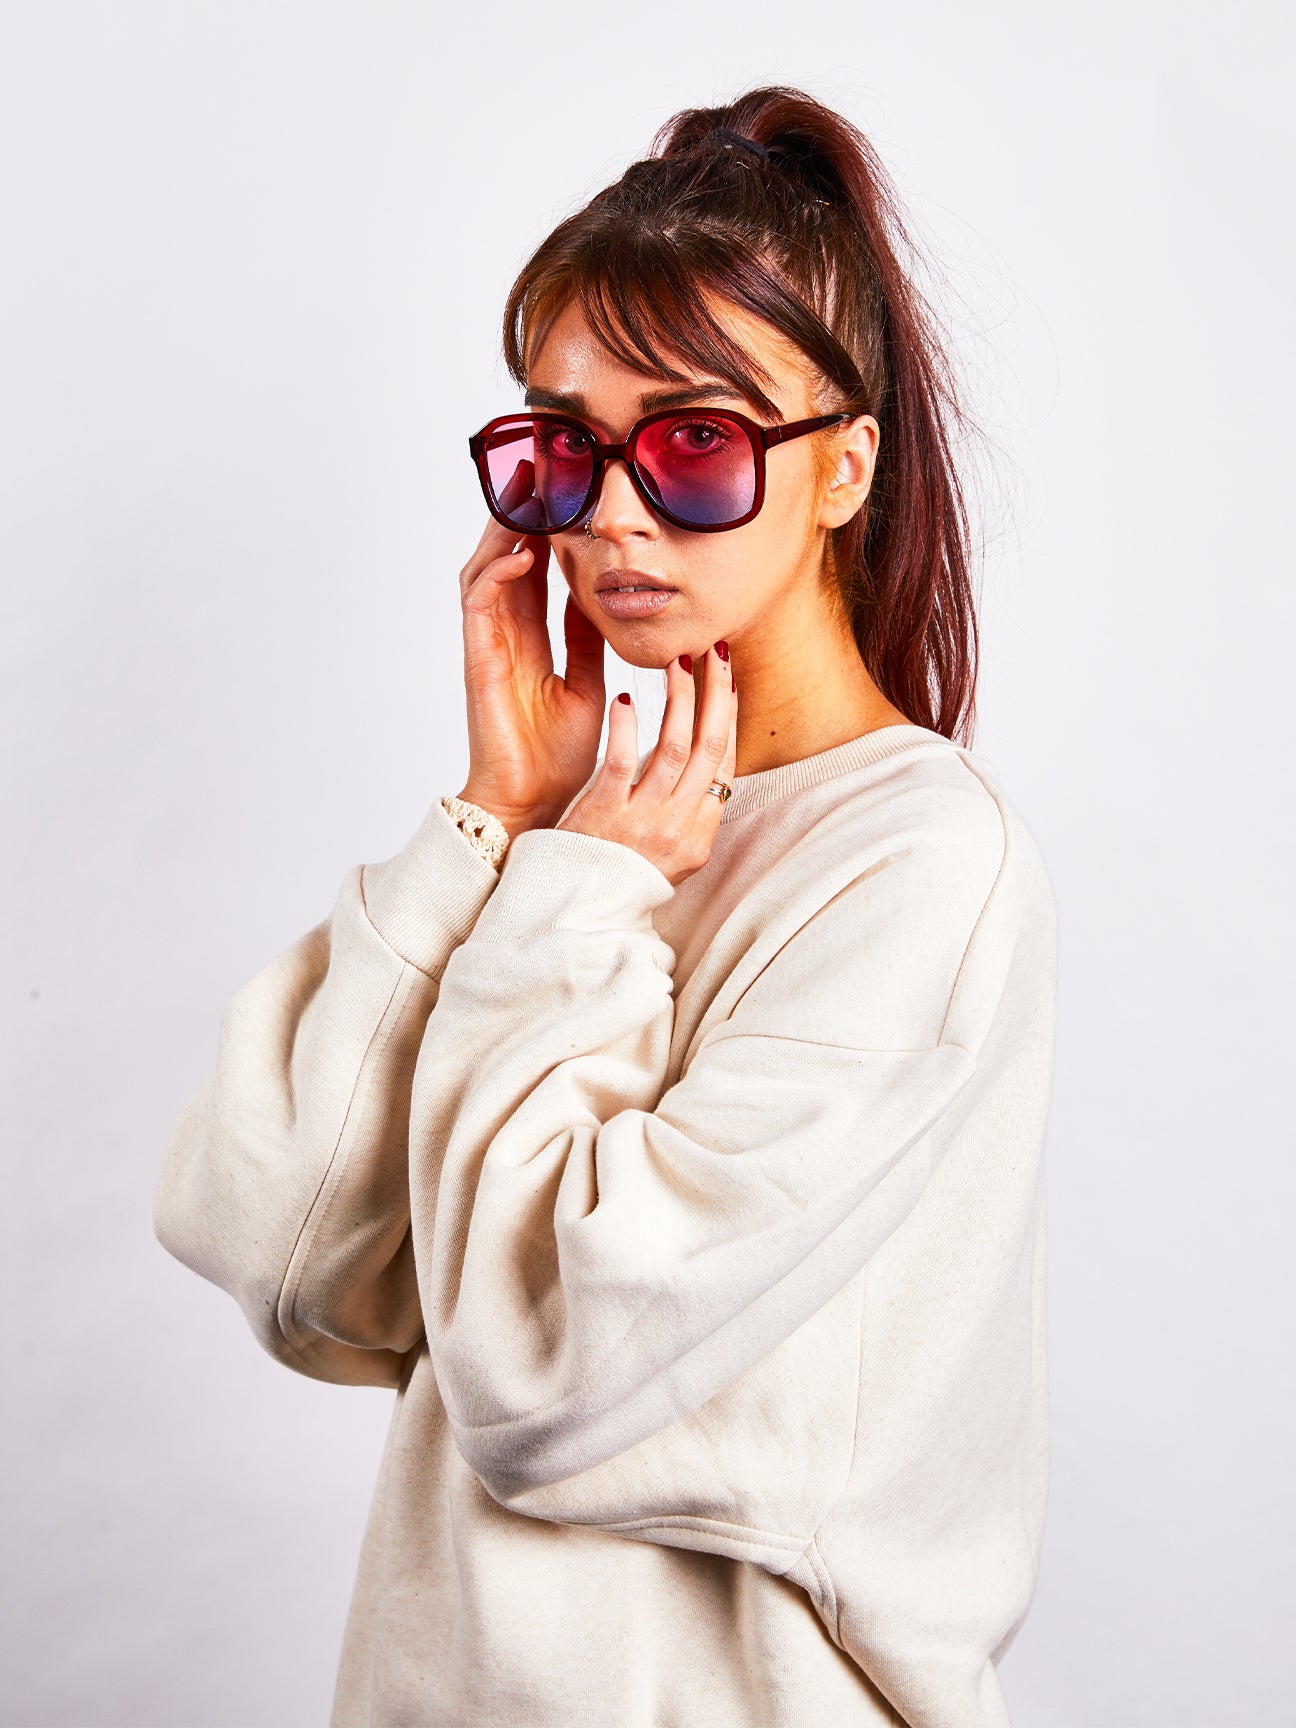 Vintage Style  Oversized Sunglasses with Ombre Lenses in Multi